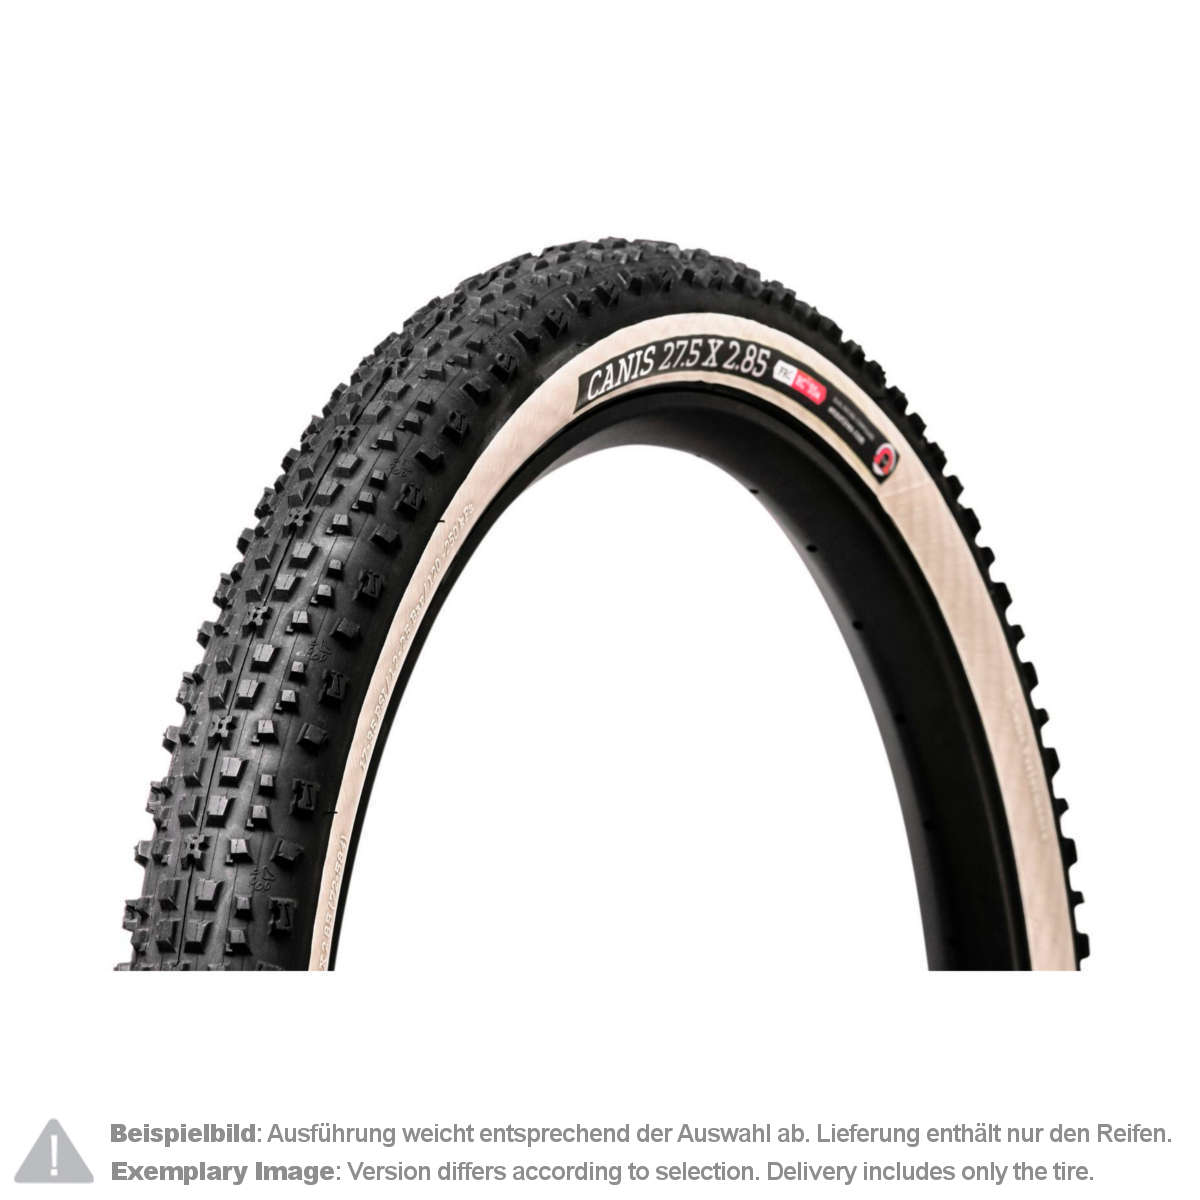 Onza MTB Tire Canis Skinwall, 27.5 x 2.85 Inch, Tubeless Ready, 60 TPI, FRC, 65a/55a, Foldable